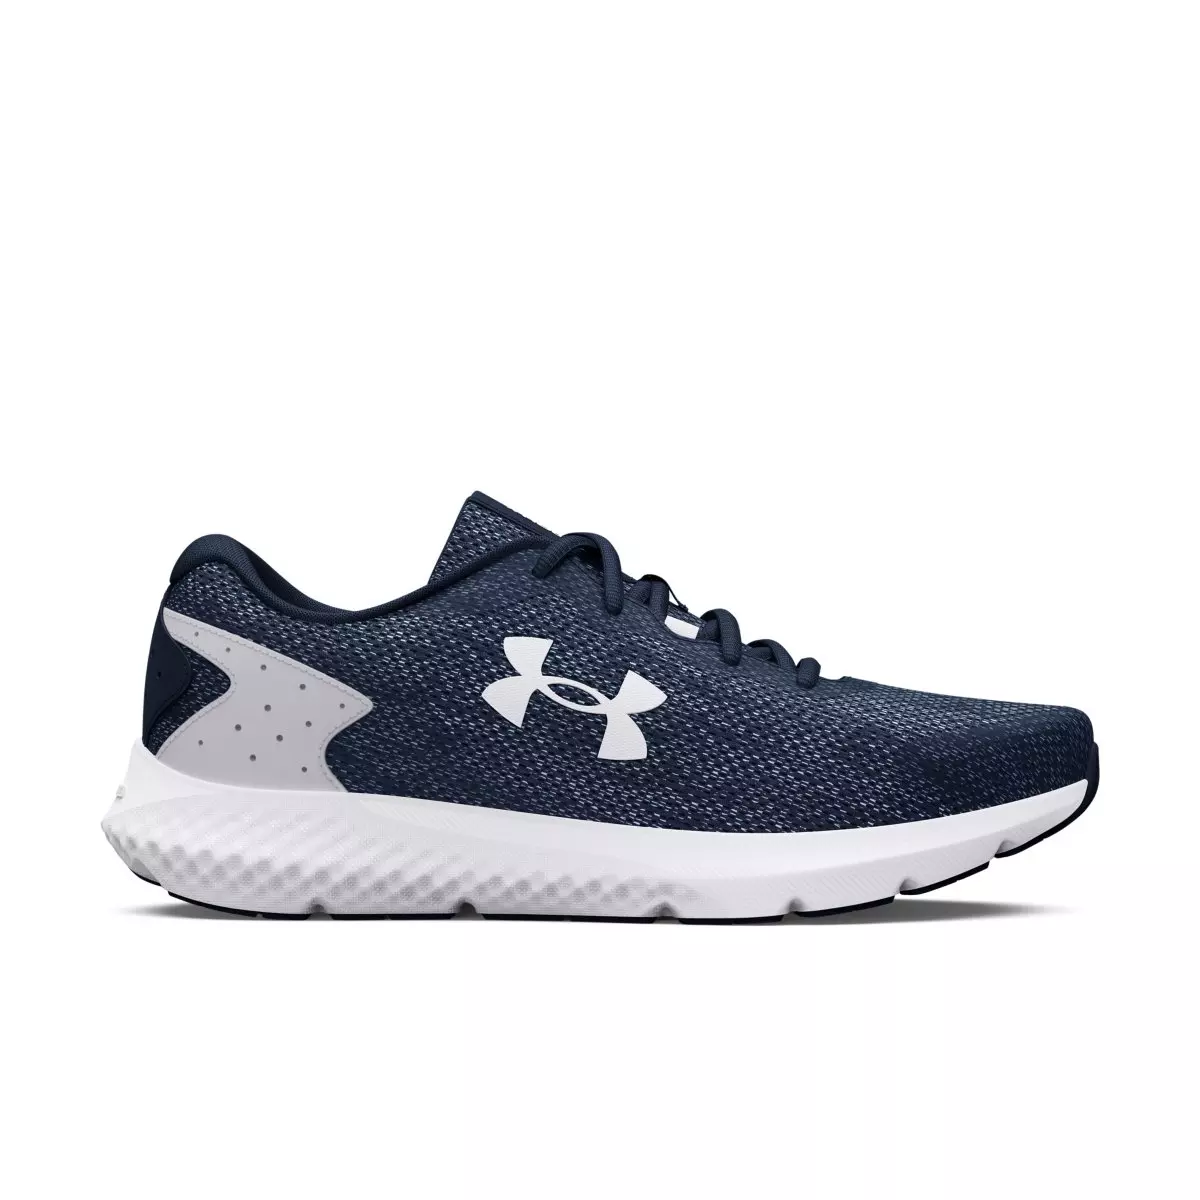 Under Armour Charged Rogue 3 Knit Academy / White Men's Running Shoe -  Hibbett